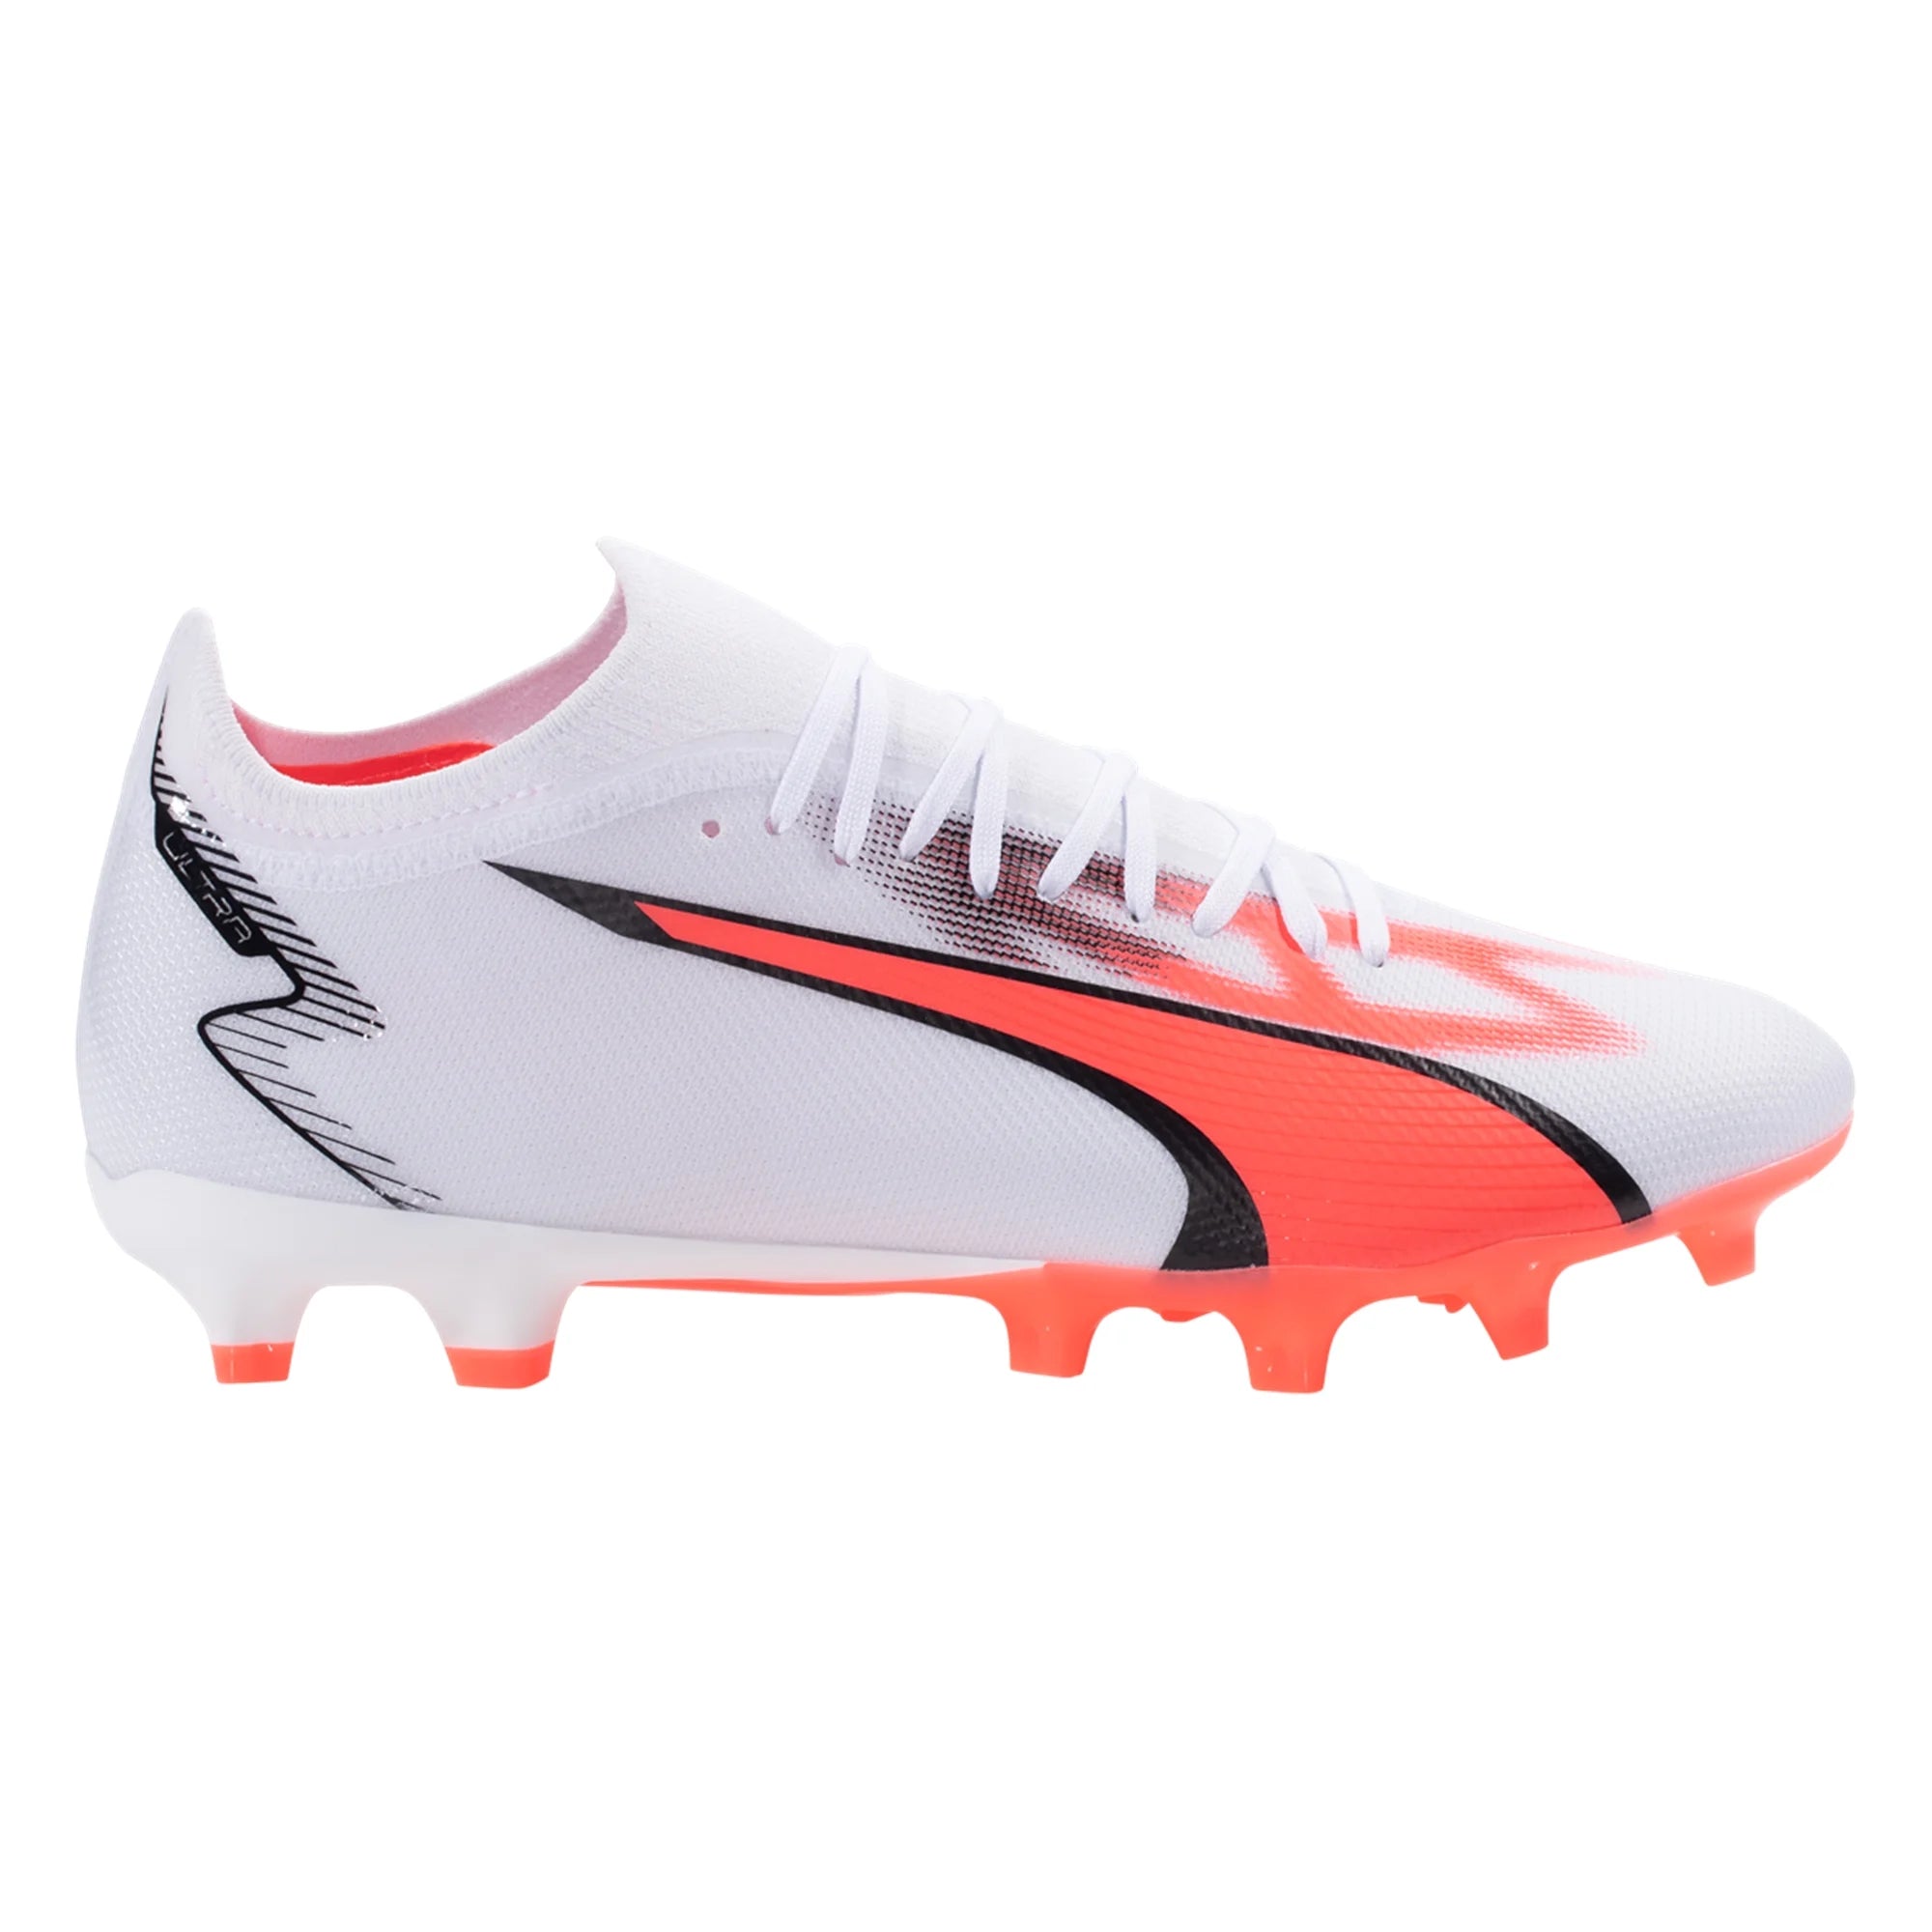 Puma Ultra Cleat Match - 107347-01 Soccer – White/Black/Fire USA FG/AG Soccer Orchid Firm Zone Ground